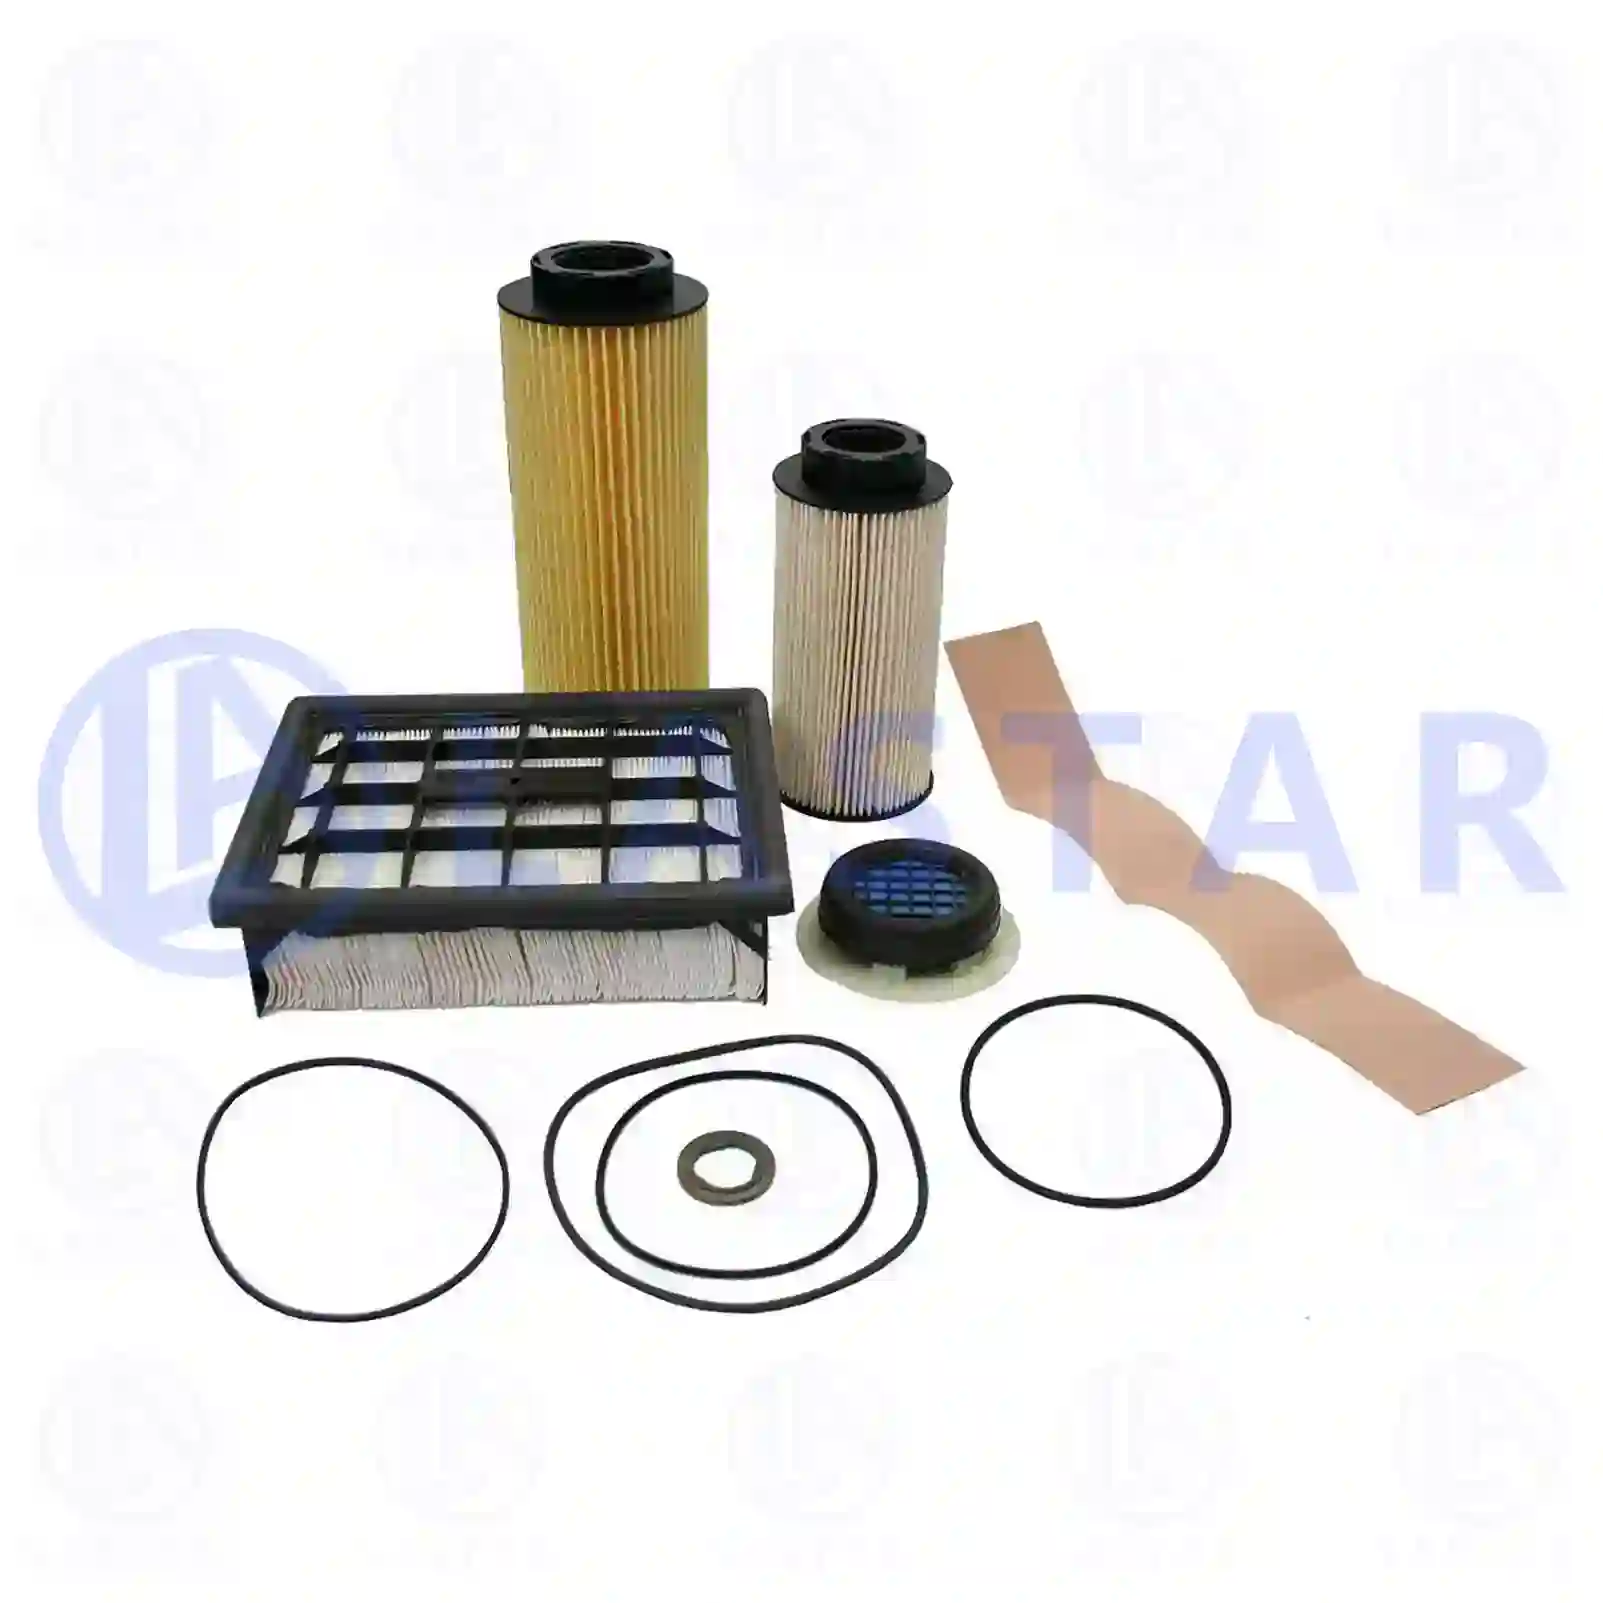 Service kit, filter - S, 77703087, 2531944, 561991, 561992 ||  77703087 Lastar Spare Part | Truck Spare Parts, Auotomotive Spare Parts Service kit, filter - S, 77703087, 2531944, 561991, 561992 ||  77703087 Lastar Spare Part | Truck Spare Parts, Auotomotive Spare Parts